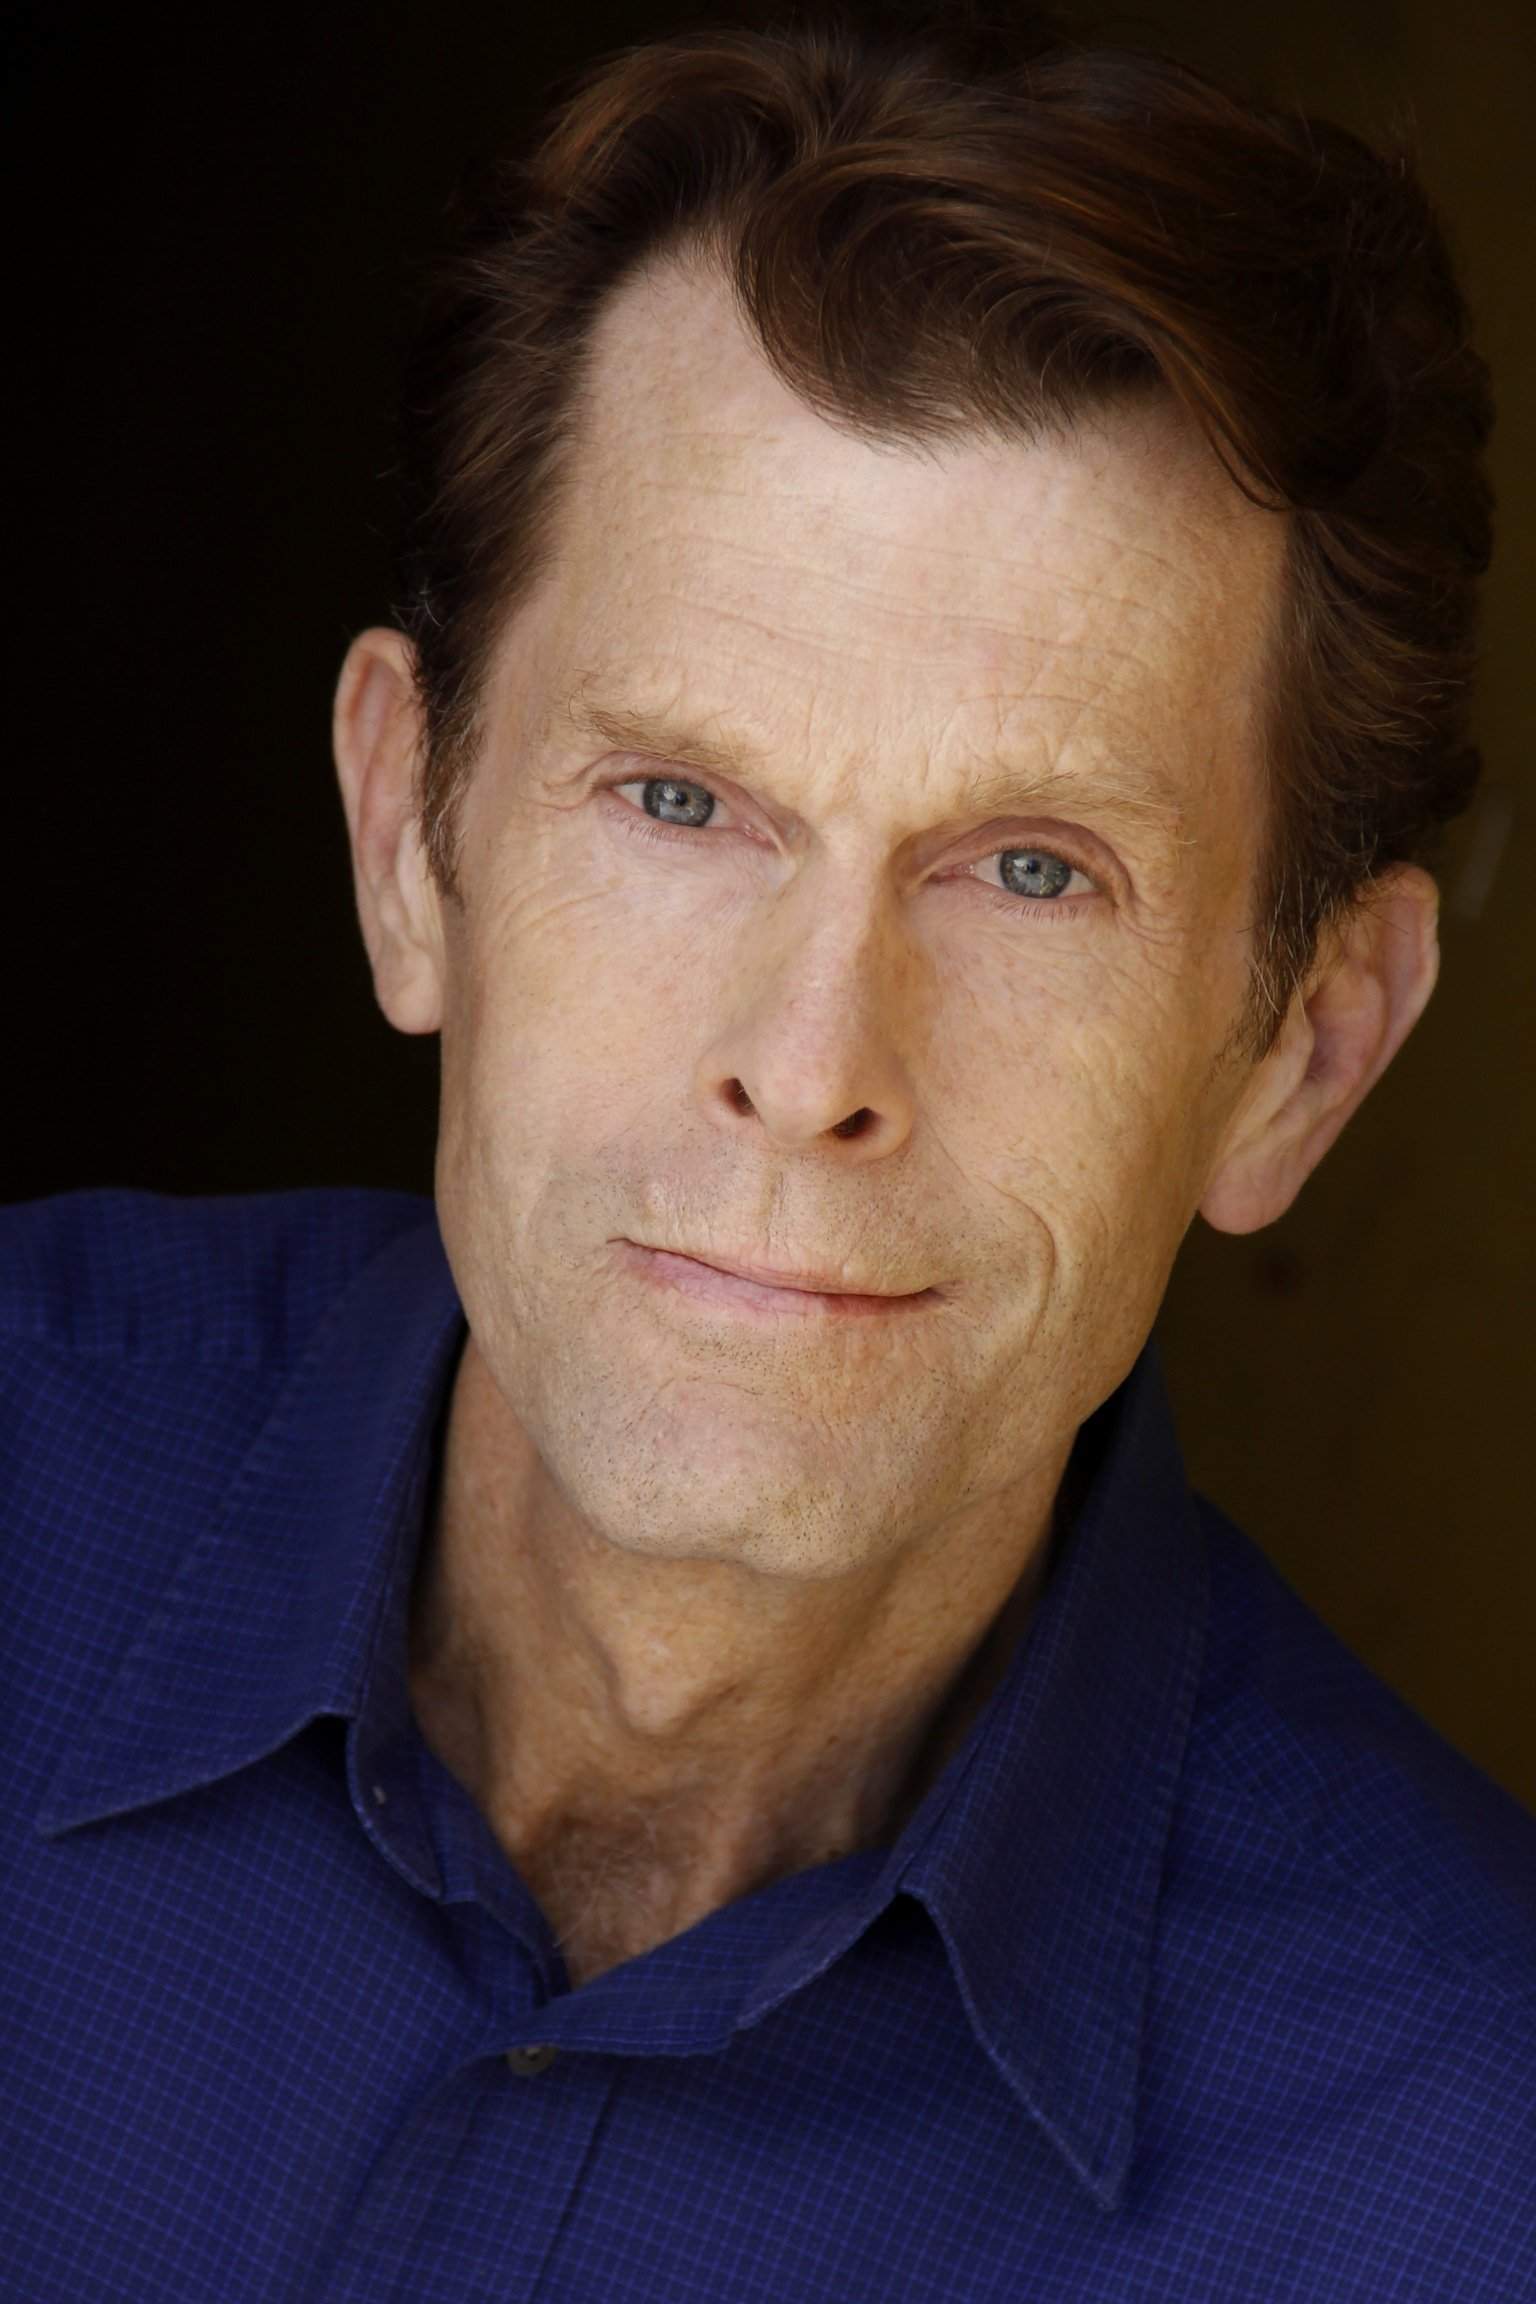 Katy on X: Young Kevin Conroy would've been the perfect live action Batman   / X